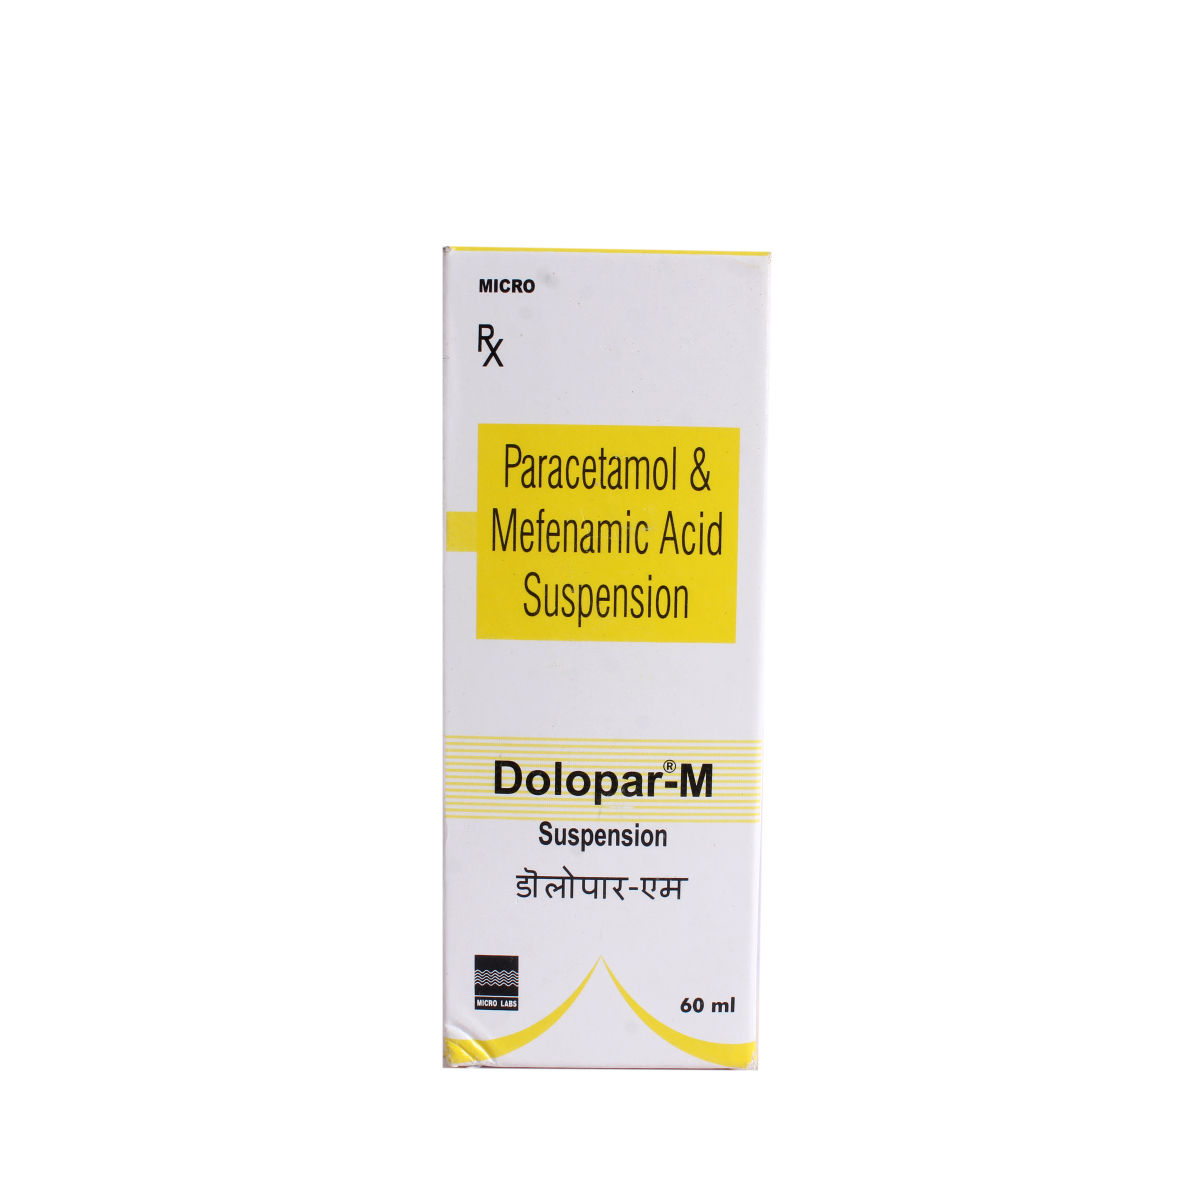 Dolopar M Suspension 60 ml Price, Uses, Side Effects, Composition ...